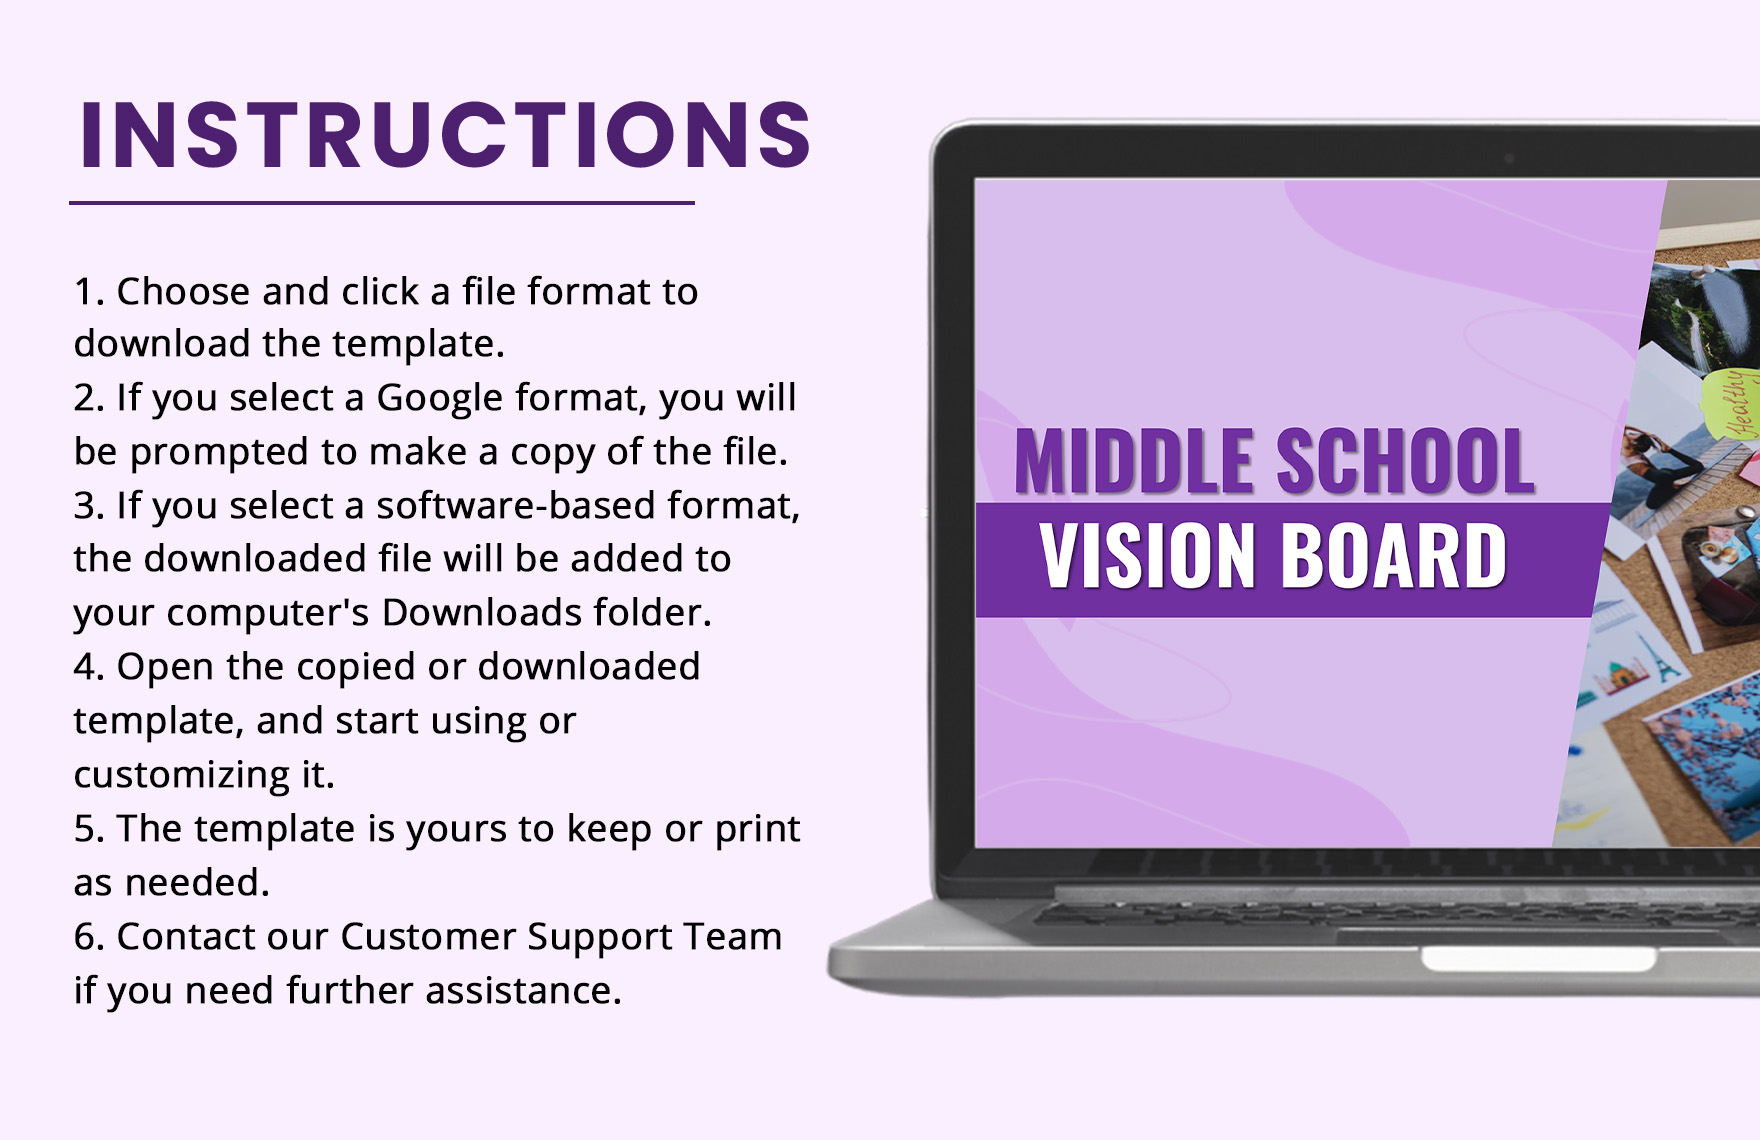 Middle School Vision Board Template